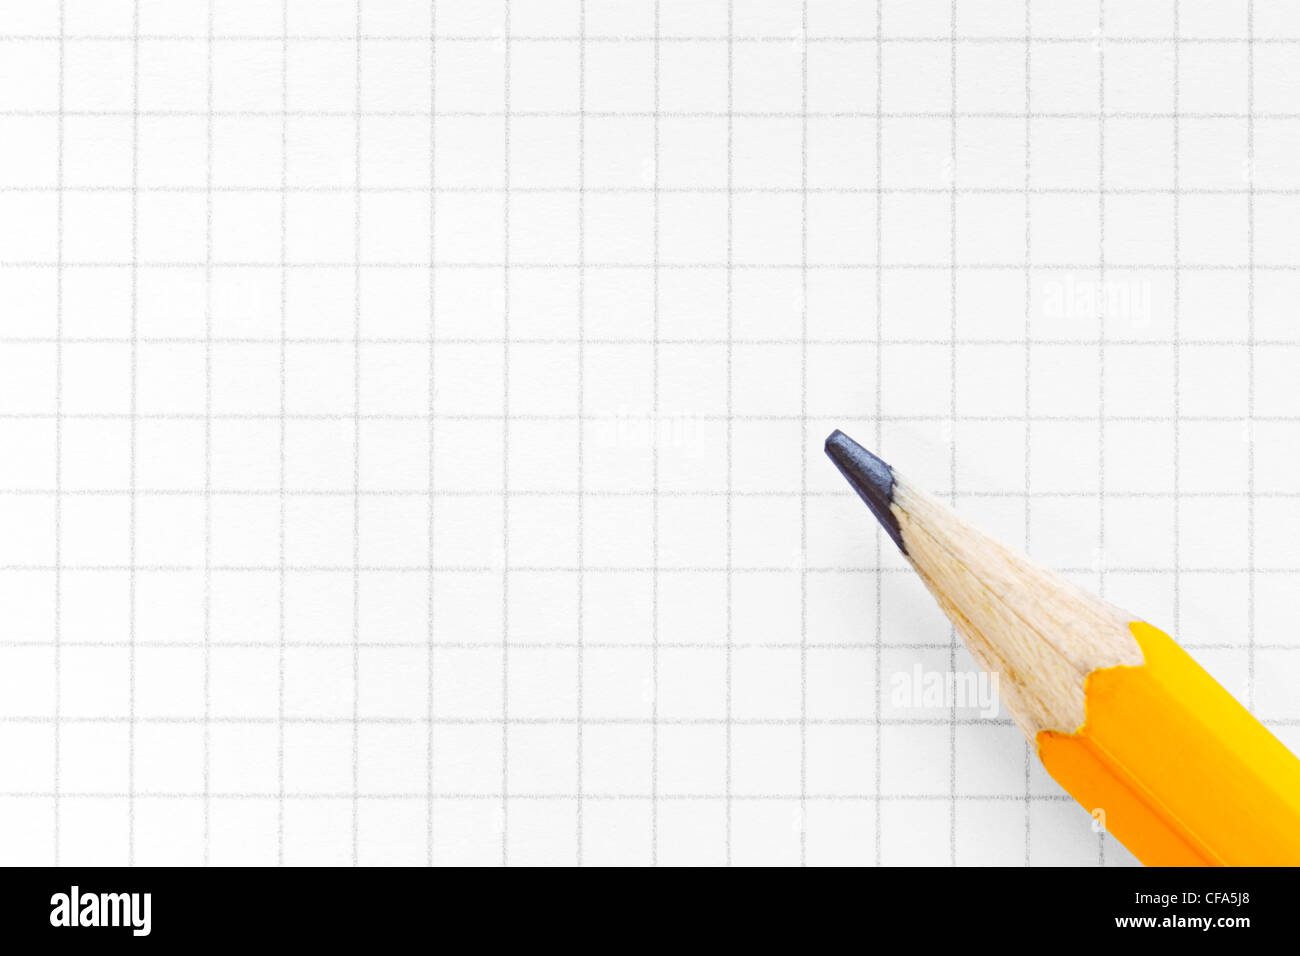 Photo of blank squared graph paper with a yellow pencil, add your own text or diagram. Stock Photo